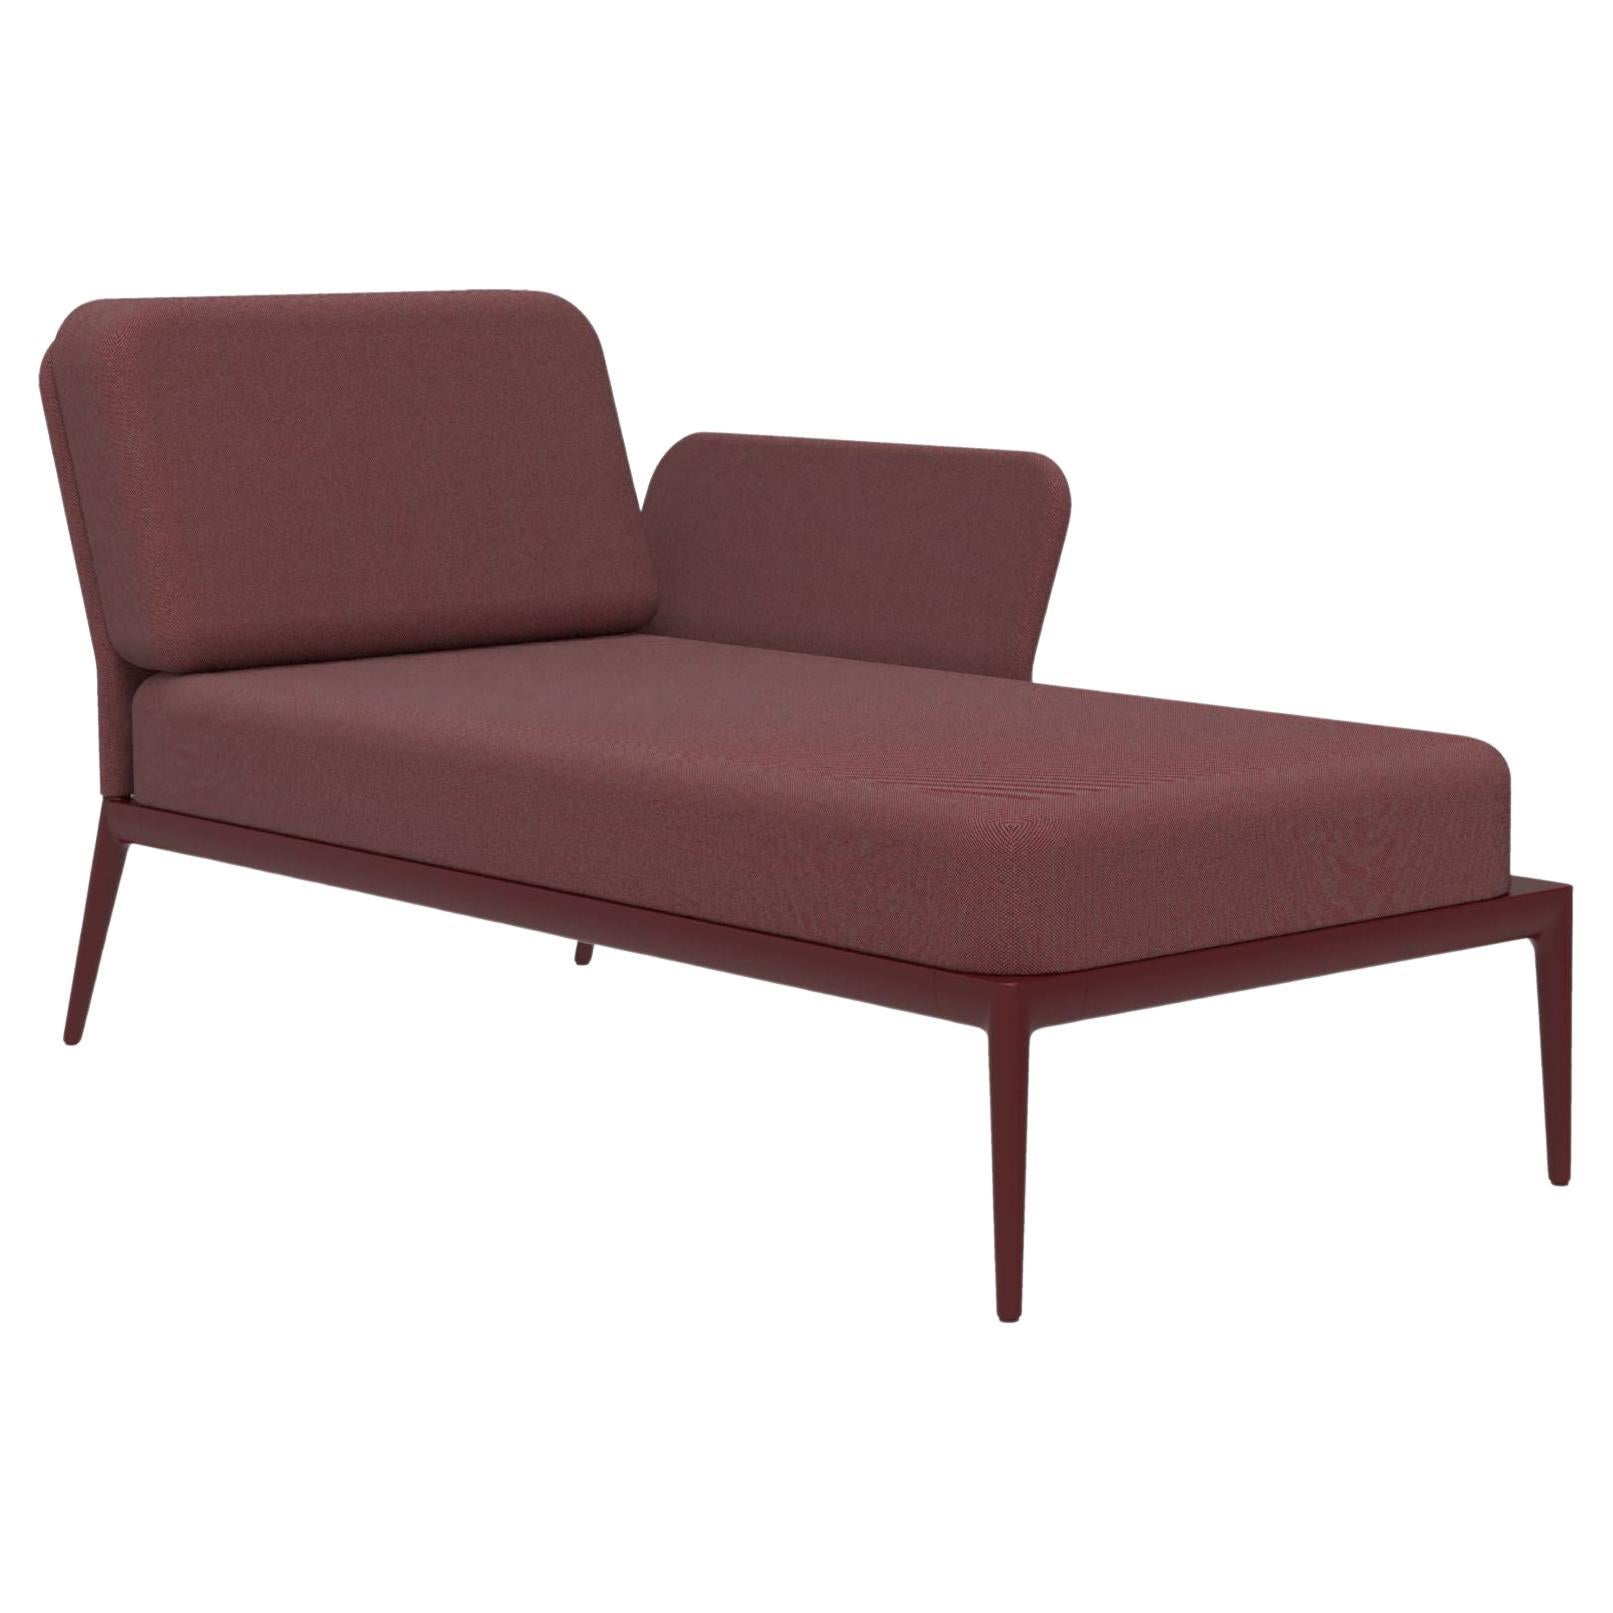 Cover Burgundy Left Chaise Longue by MOWEE For Sale